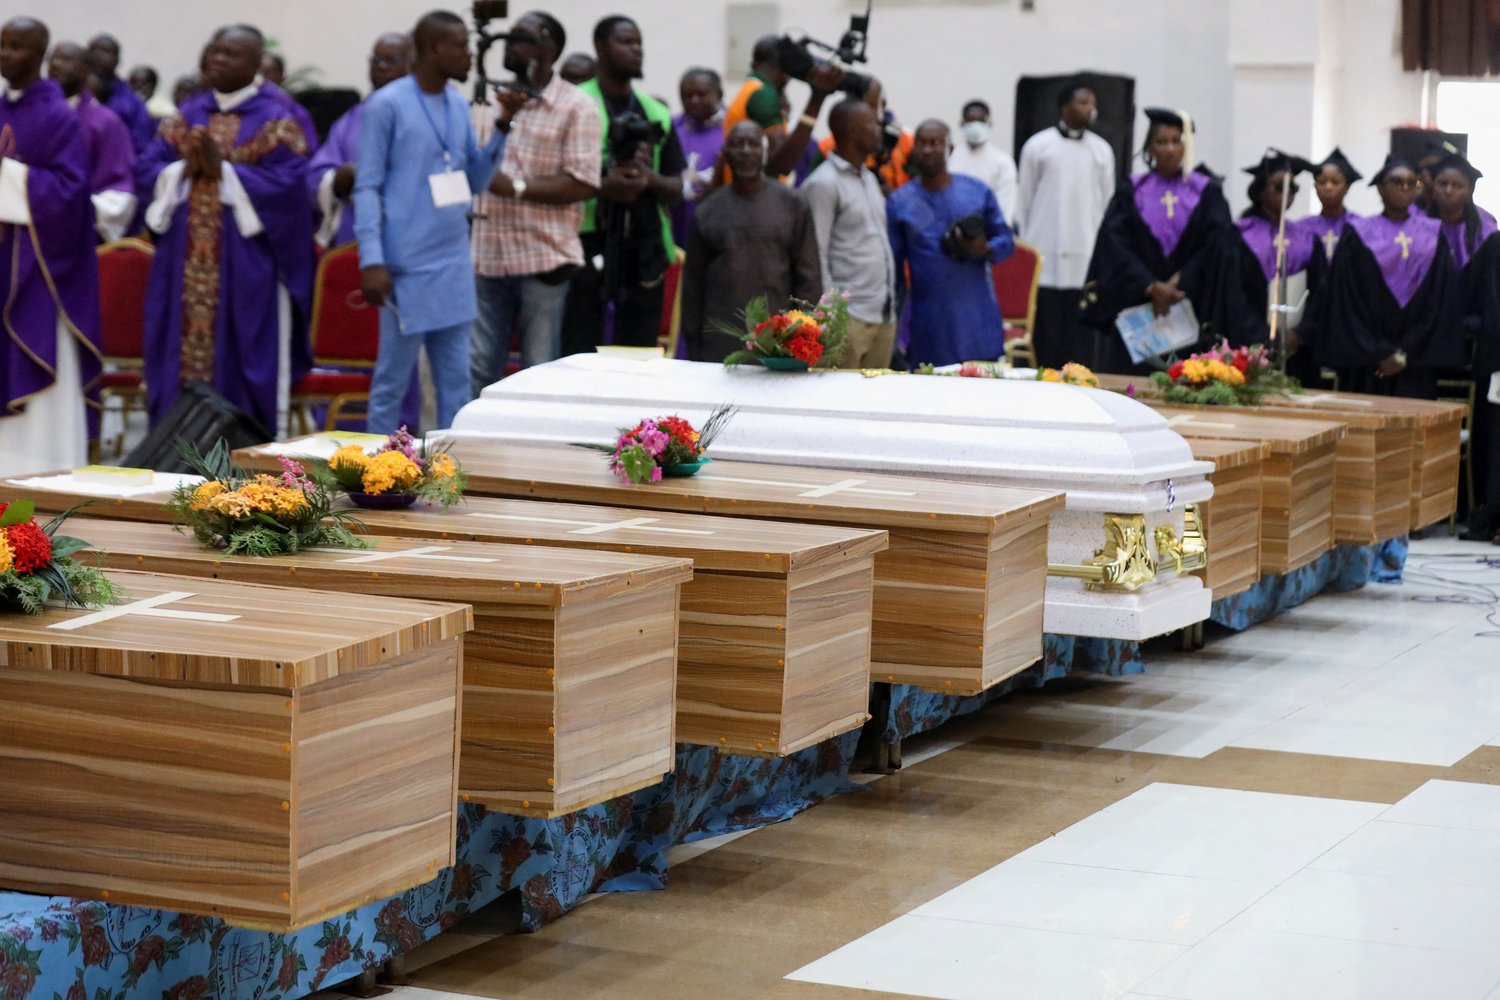 Flowers lie on caskets during a Funeral Mass in the parish hall of St. Francis Xavier Church in Owo, Nigeria, June 17.